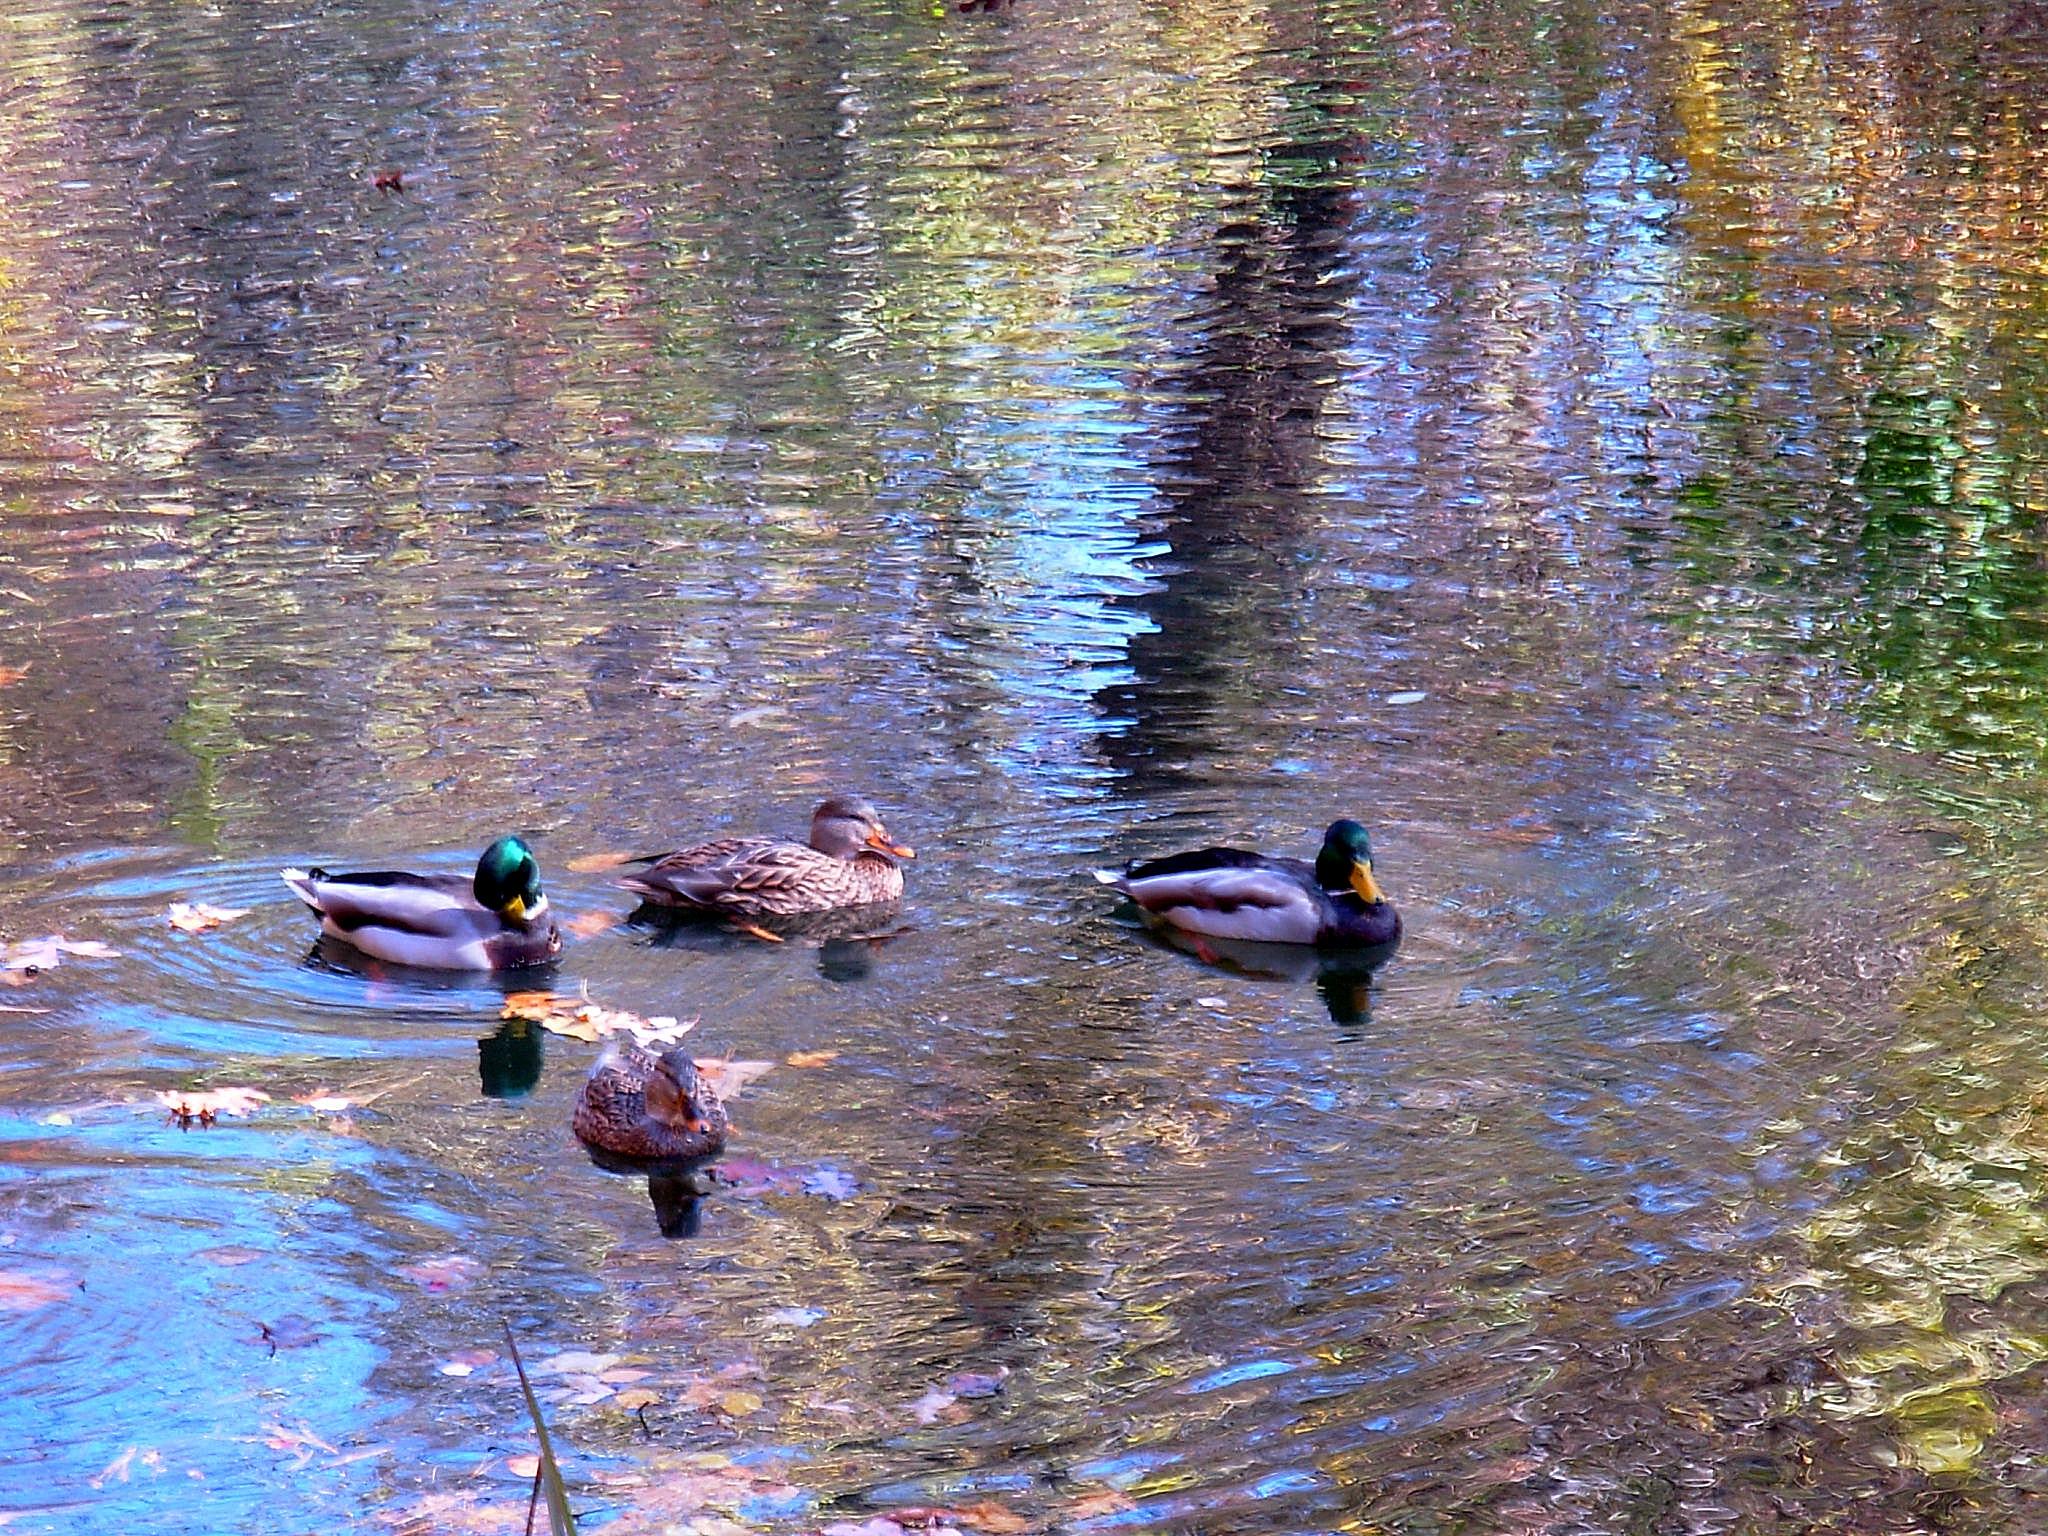 &#8220;Ducks A la Monet&#8221; (user submitted)